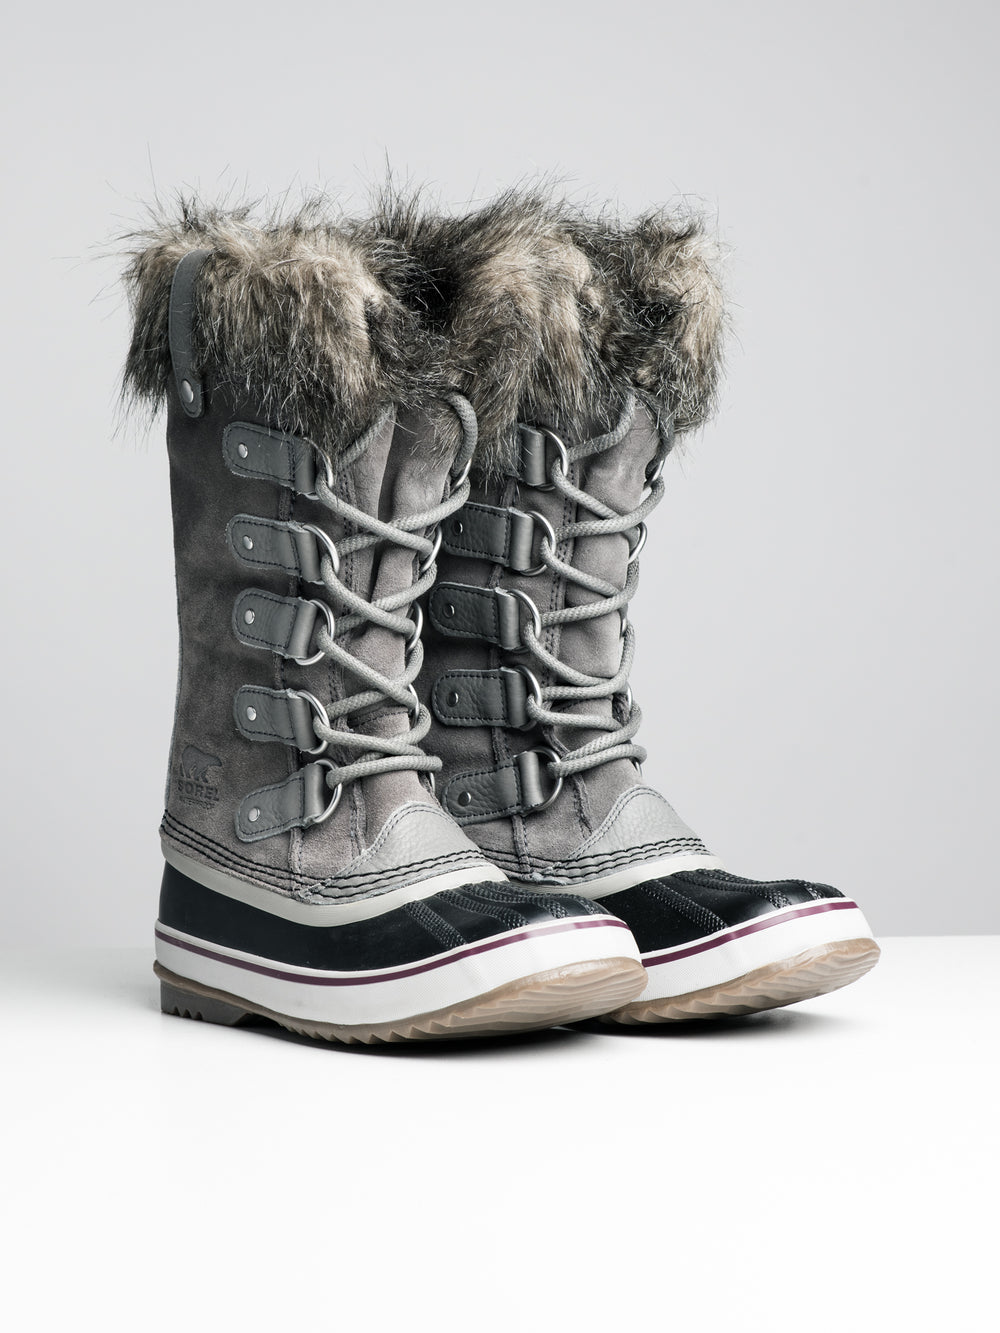 WOMENS JOAN OF ARCTIC  BOOTS - CLEARANCE